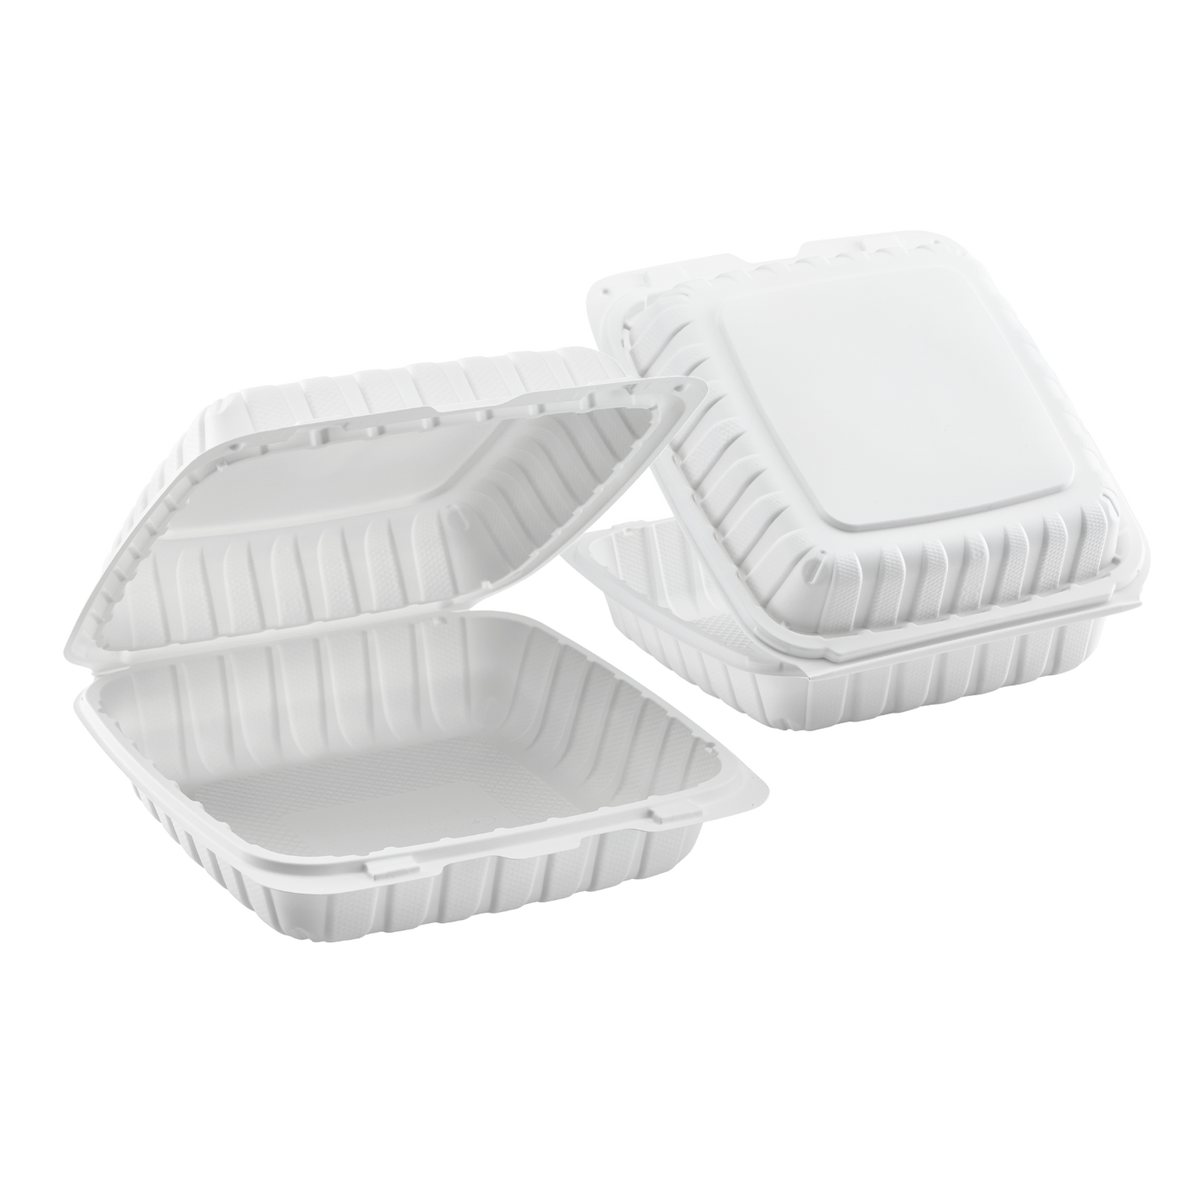 Large Clamshell Takeout Boxes - Karat 8''x8'' Hinged Containers